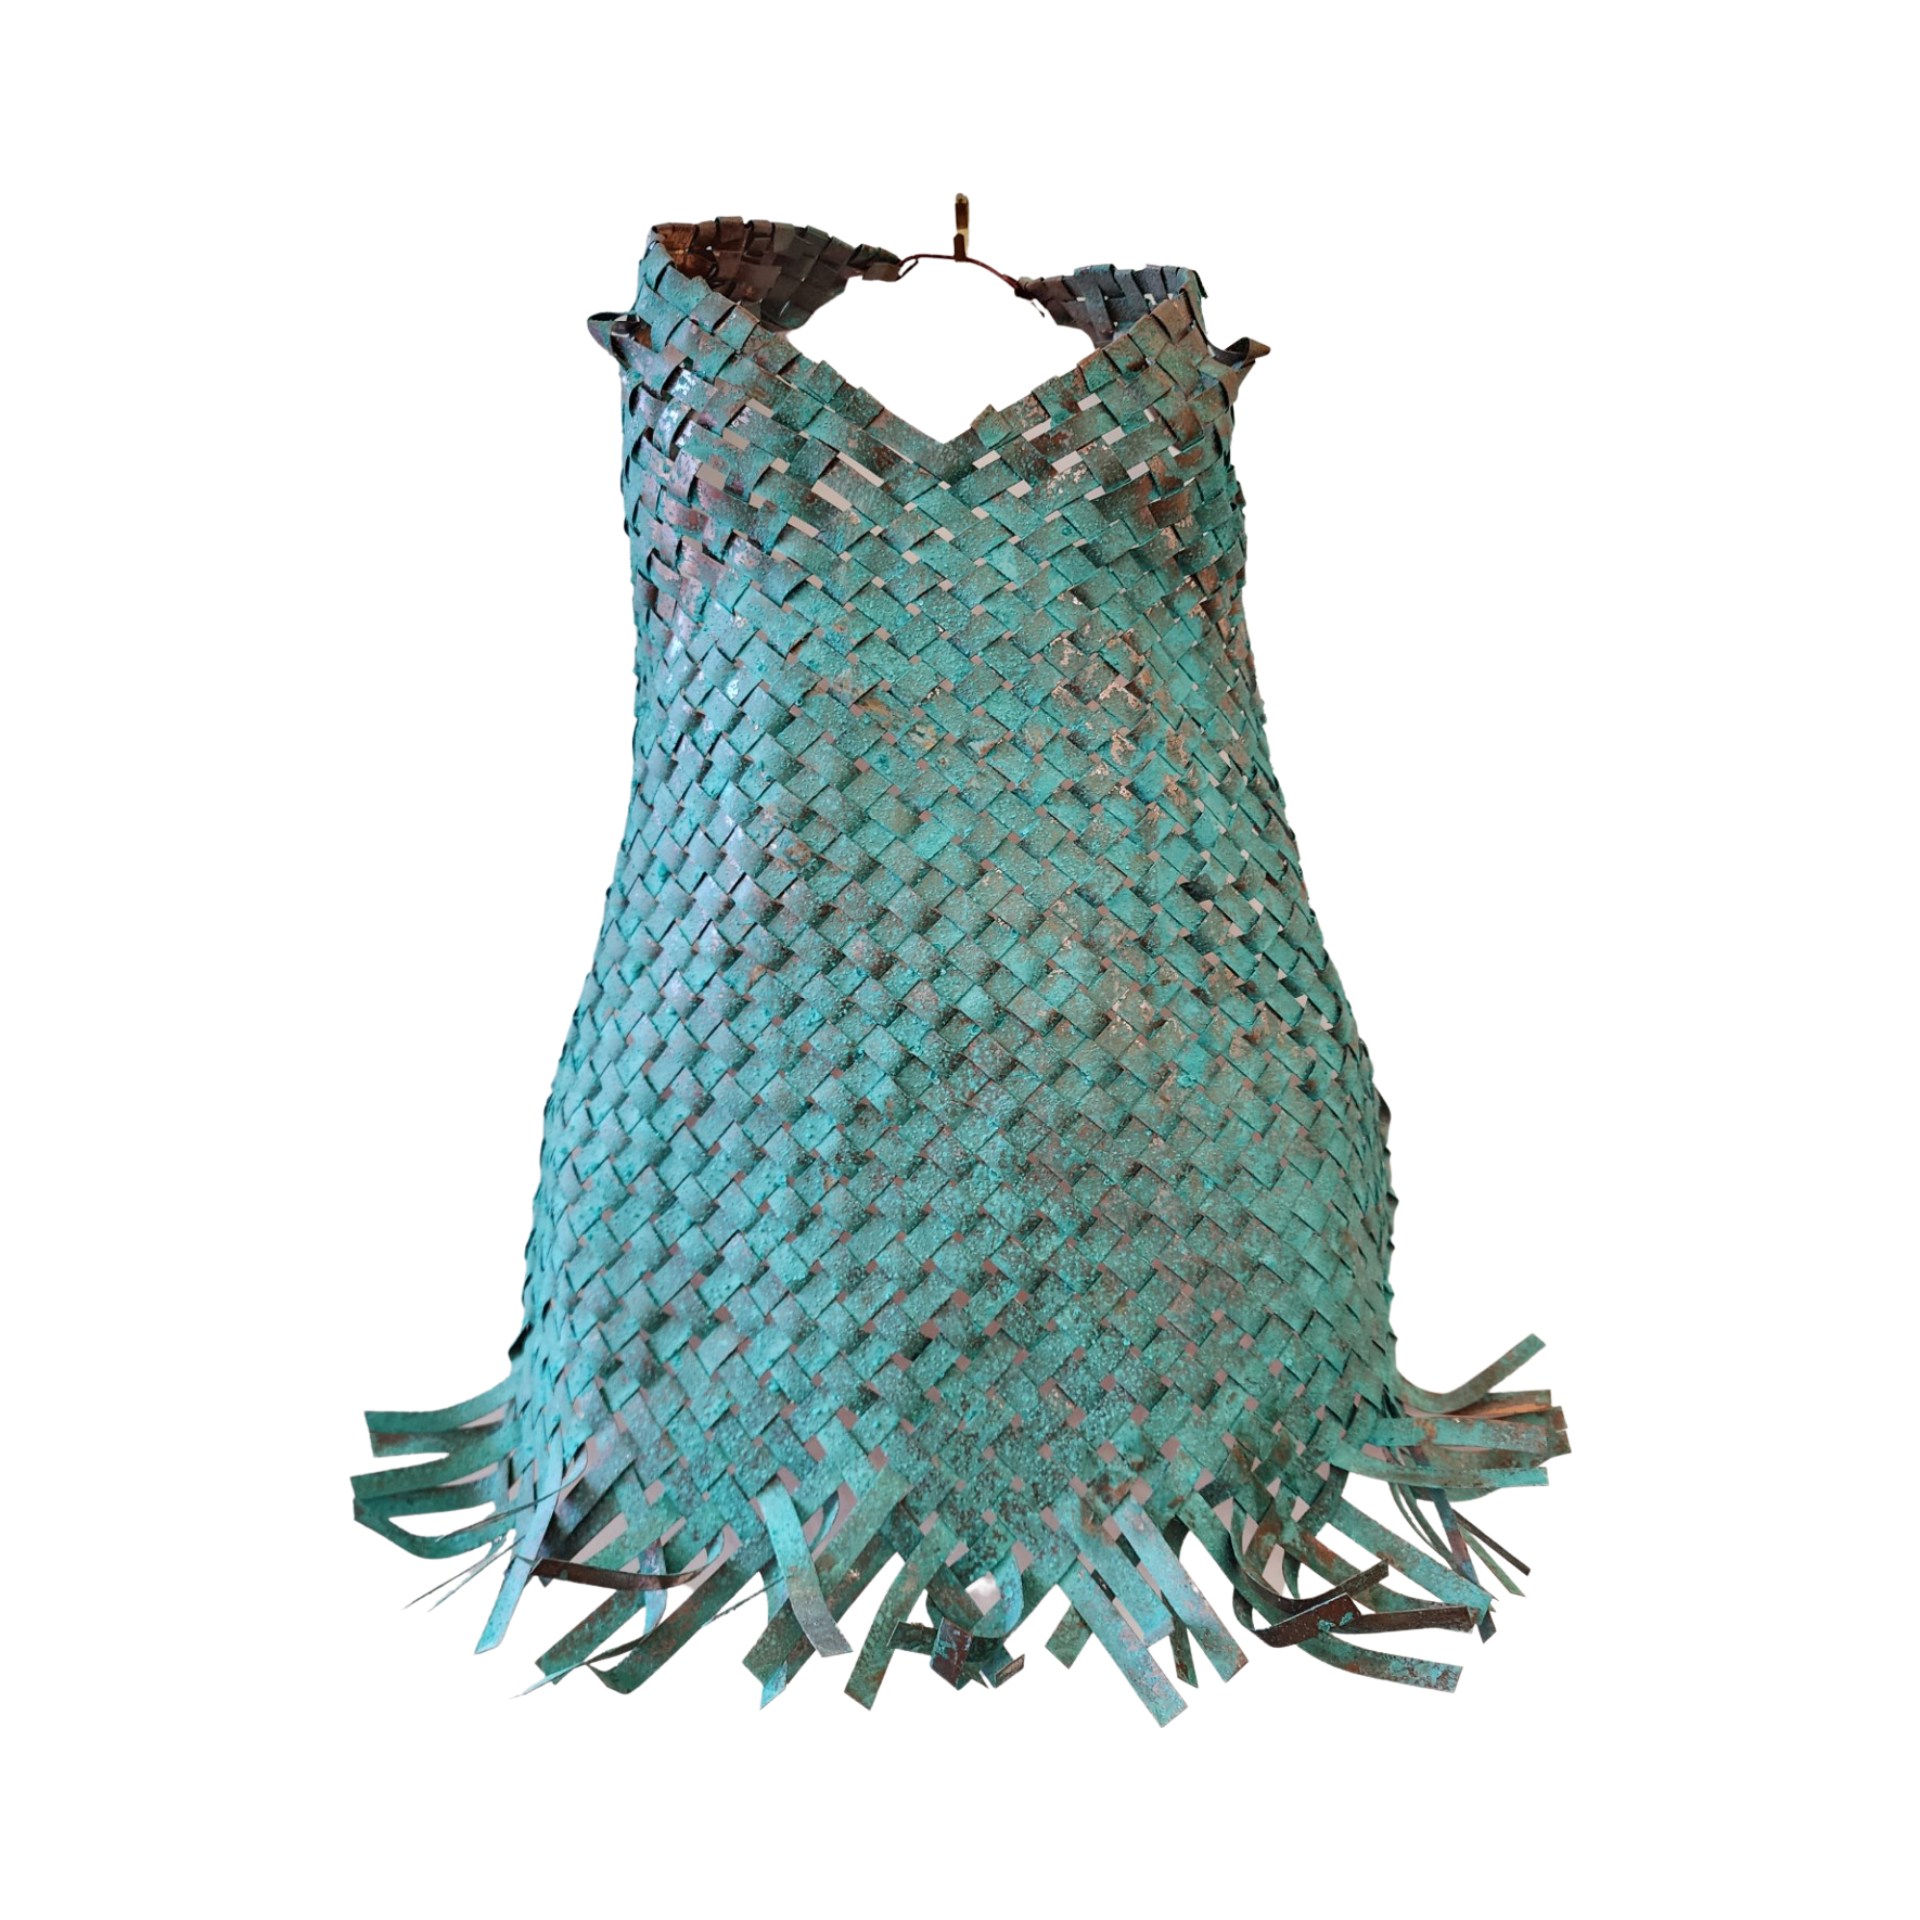 Woven Copper Bodice with patina